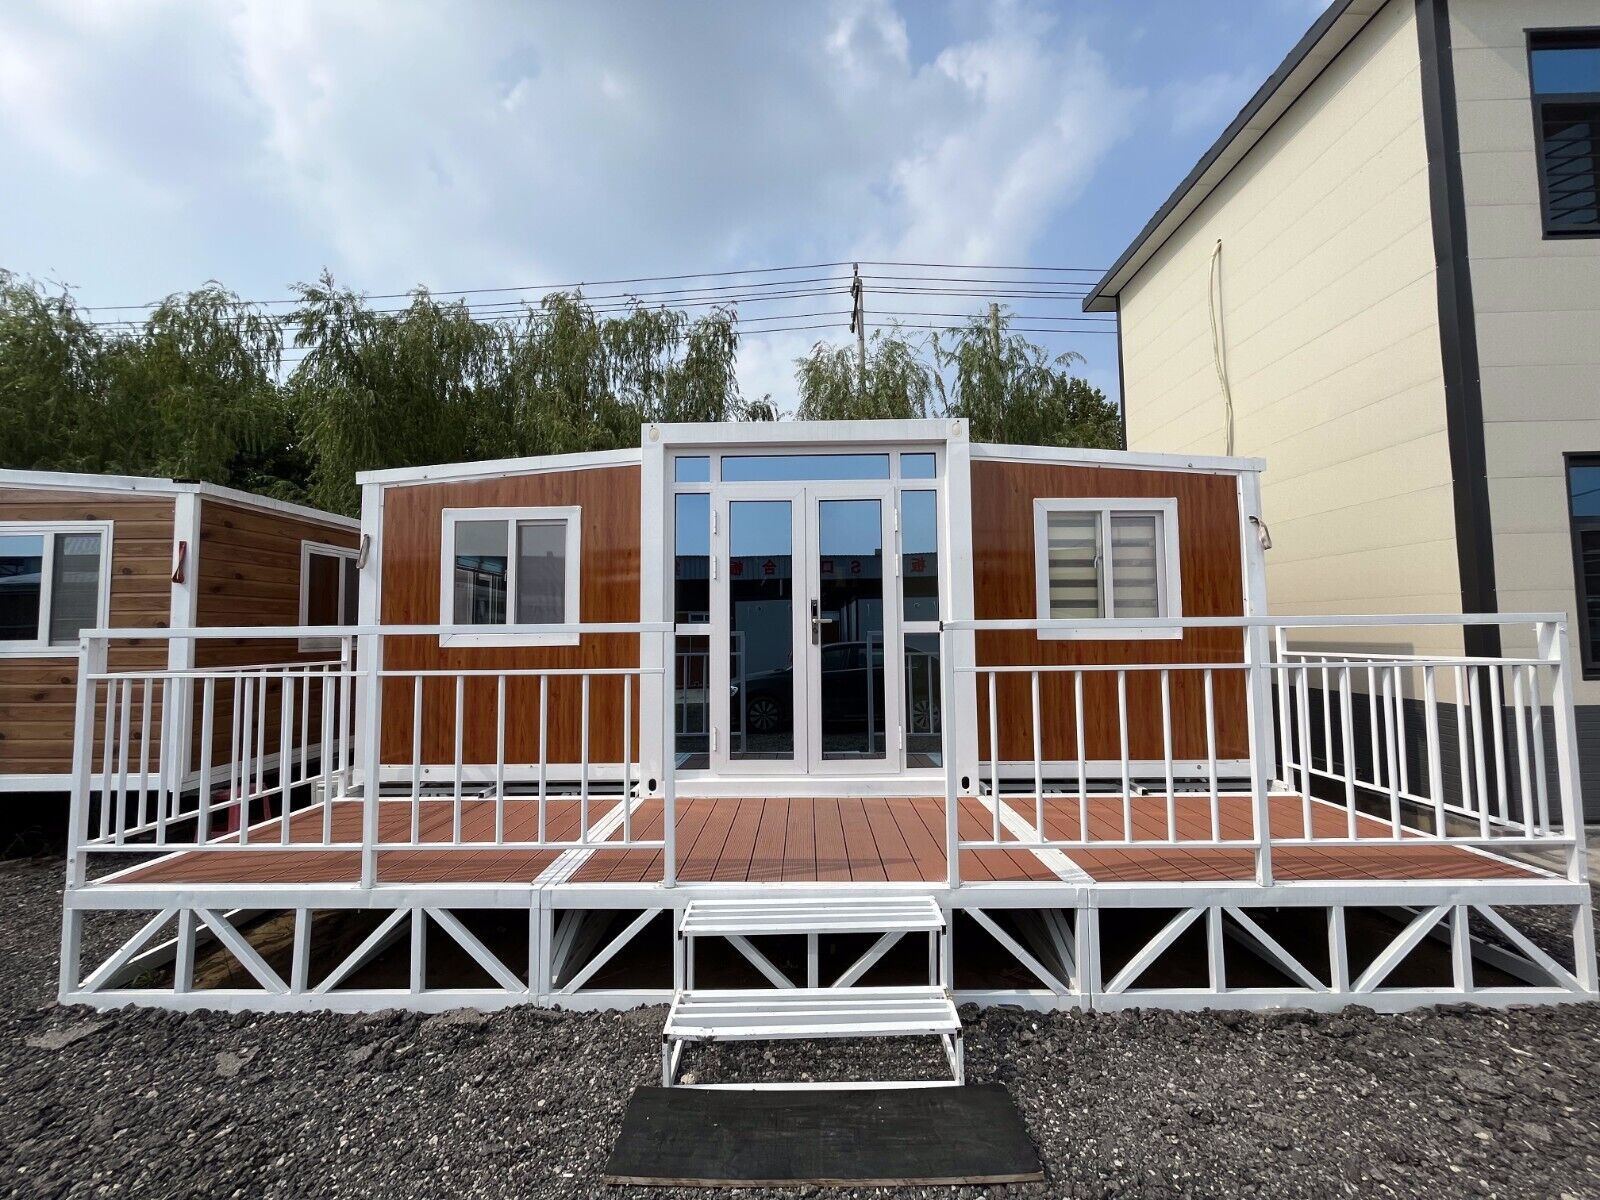 Discover cozy living in a mobile prefab tiny house with lockable doors/windows